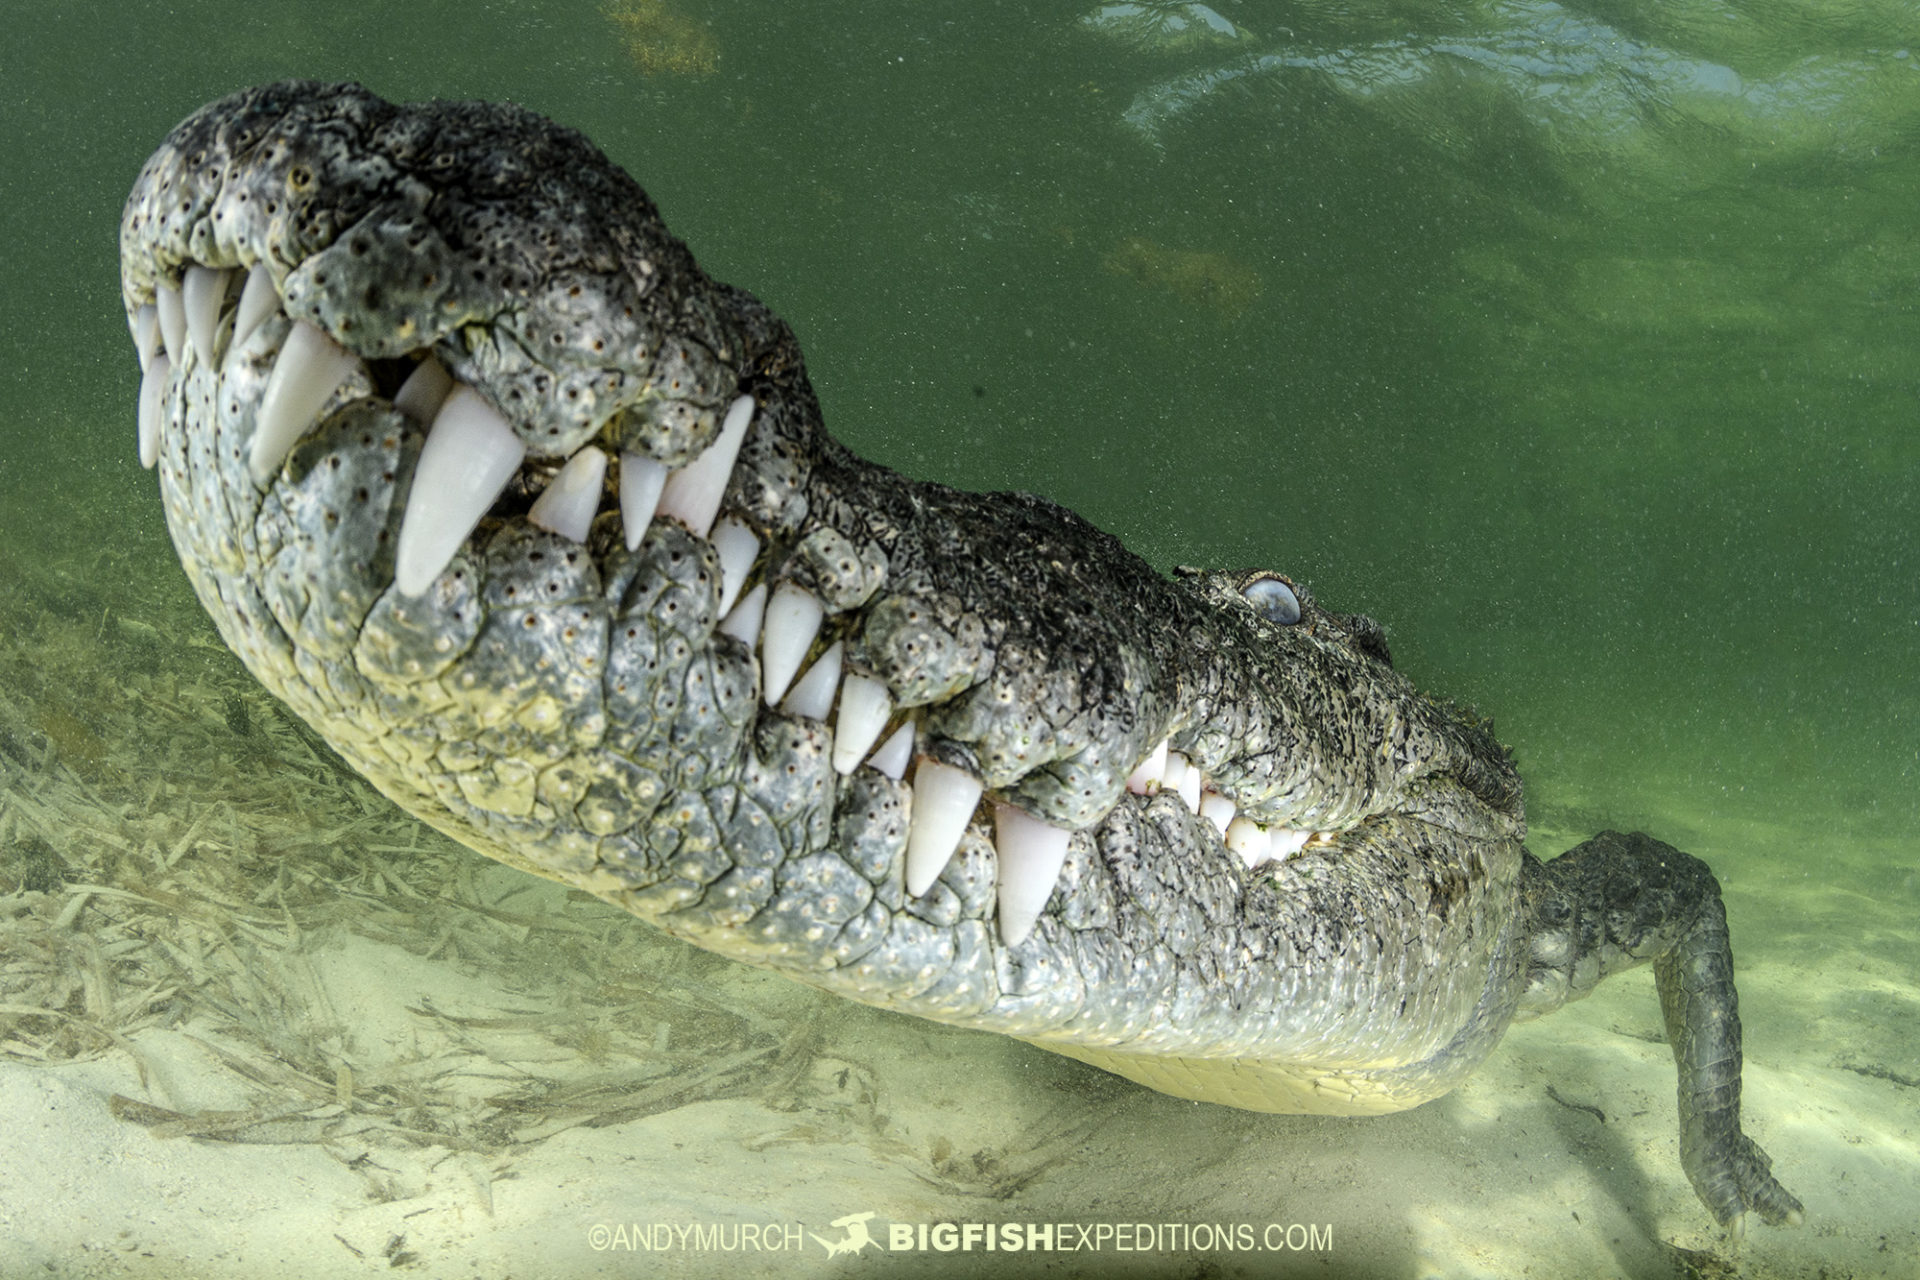 Swimming with crocodiles in Mexico